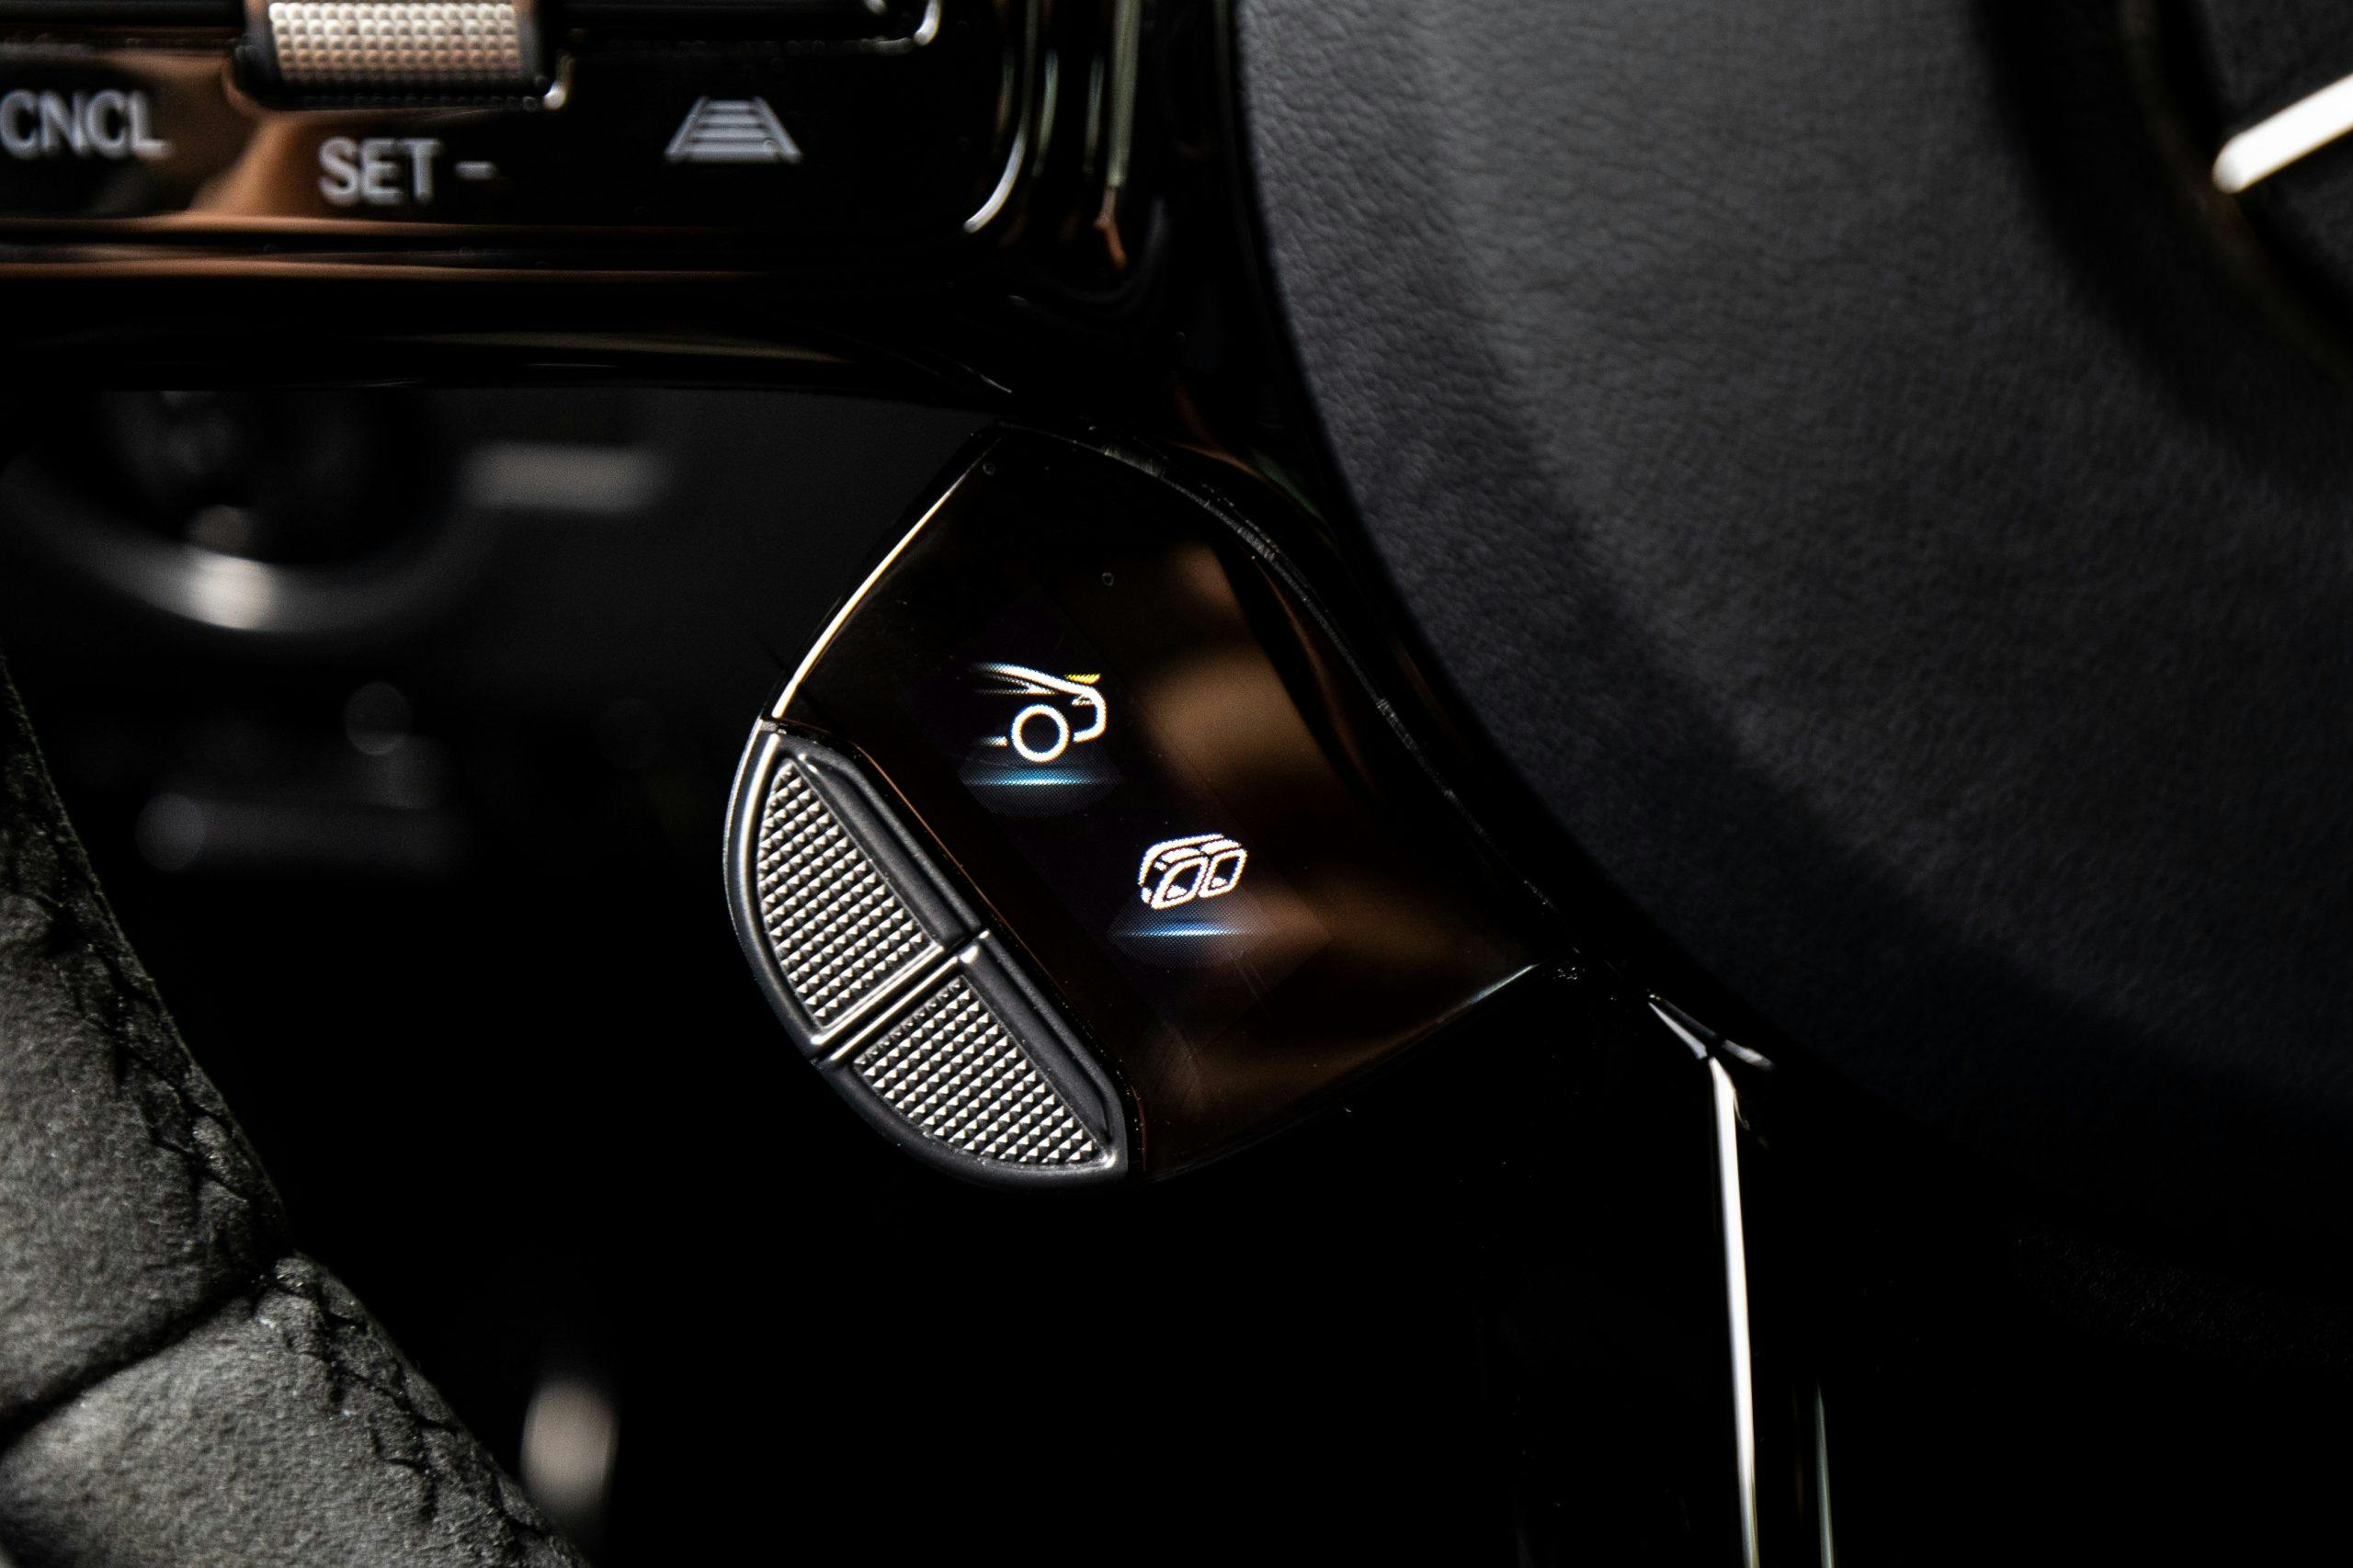 2021 Mercedes-AMG GT Stealth Edition steering wheel mode buttons